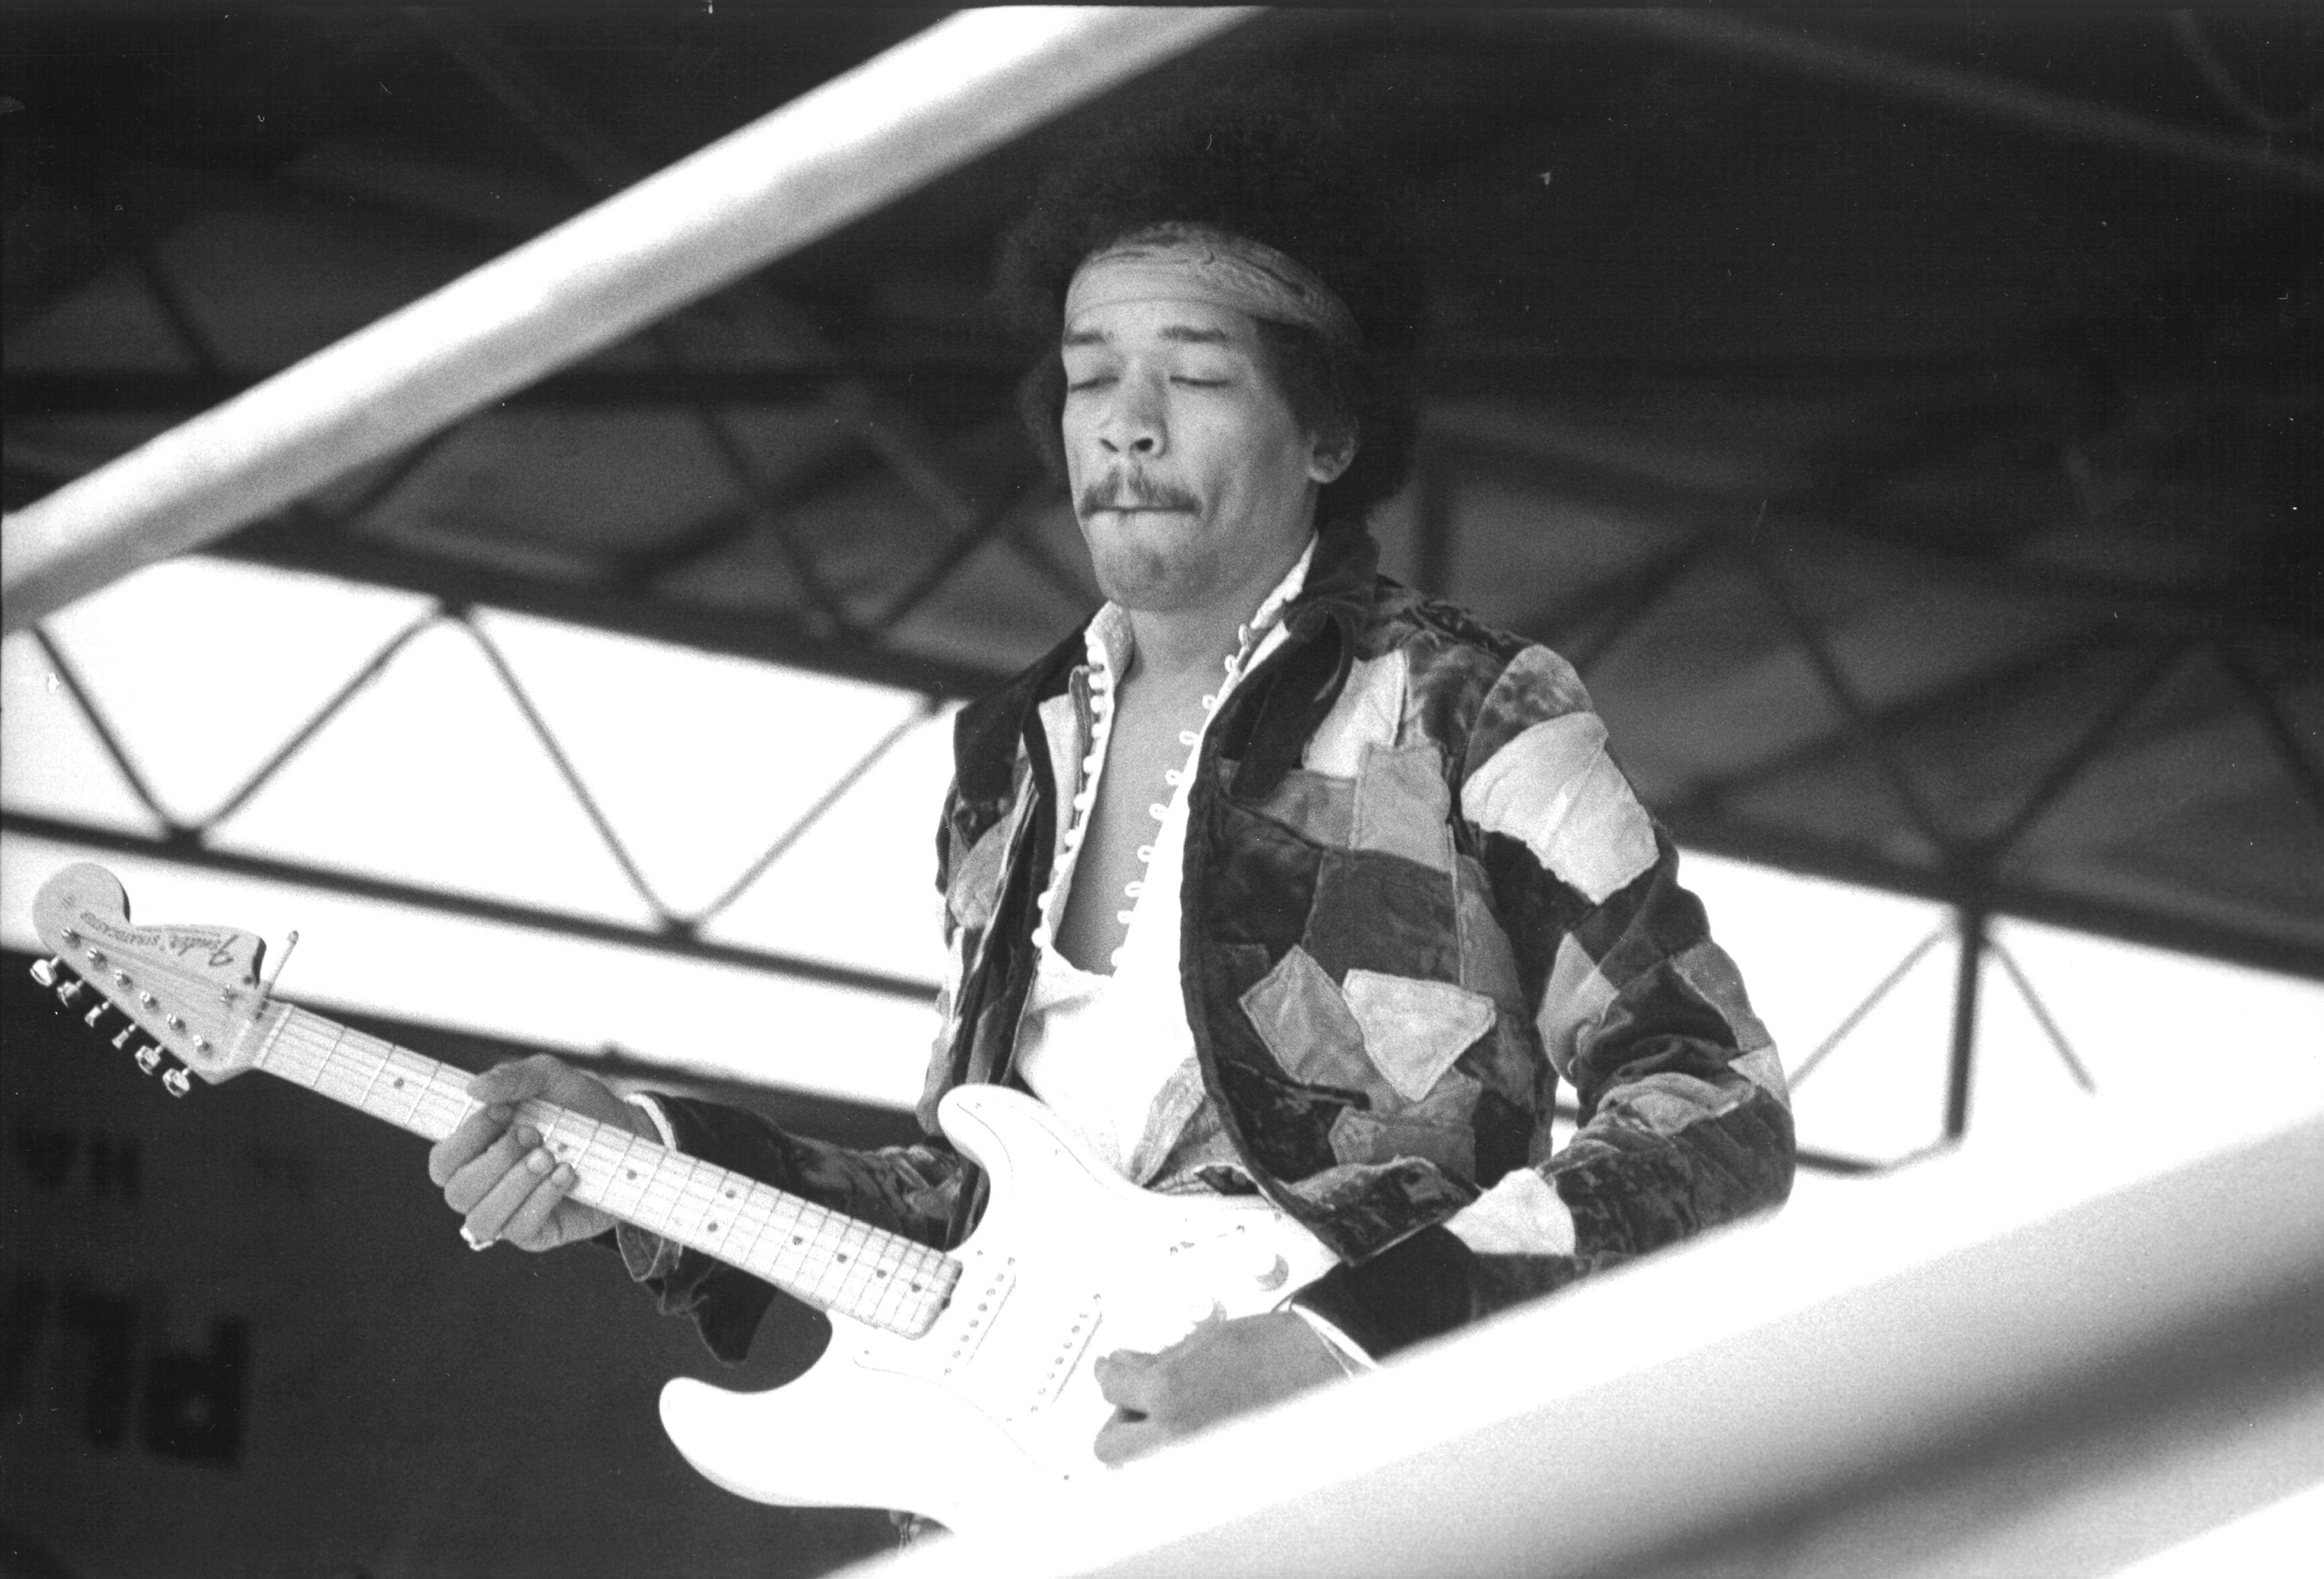 Jimi Hendrix performing on stage playing an electric guitar, wearing a patterned jacket and headband